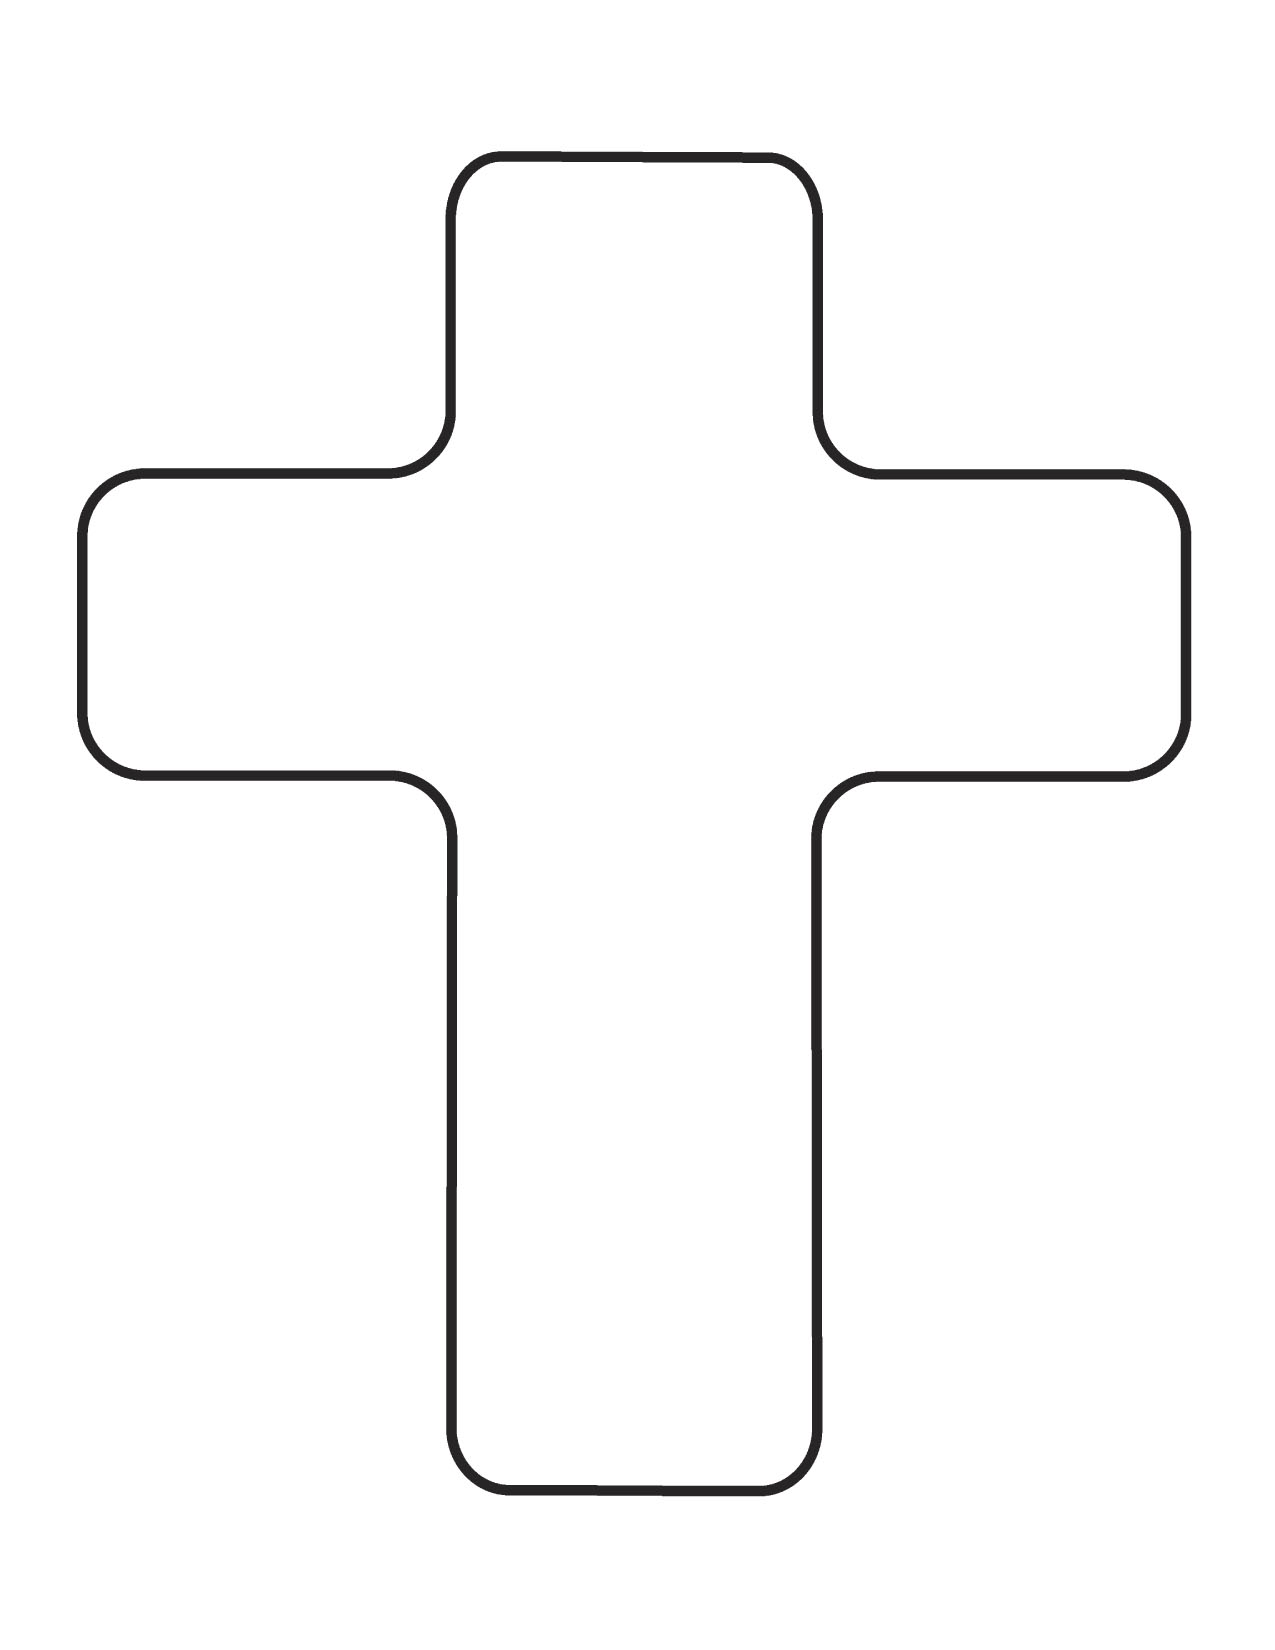 OUTLINE OF CROSS - Clipart library